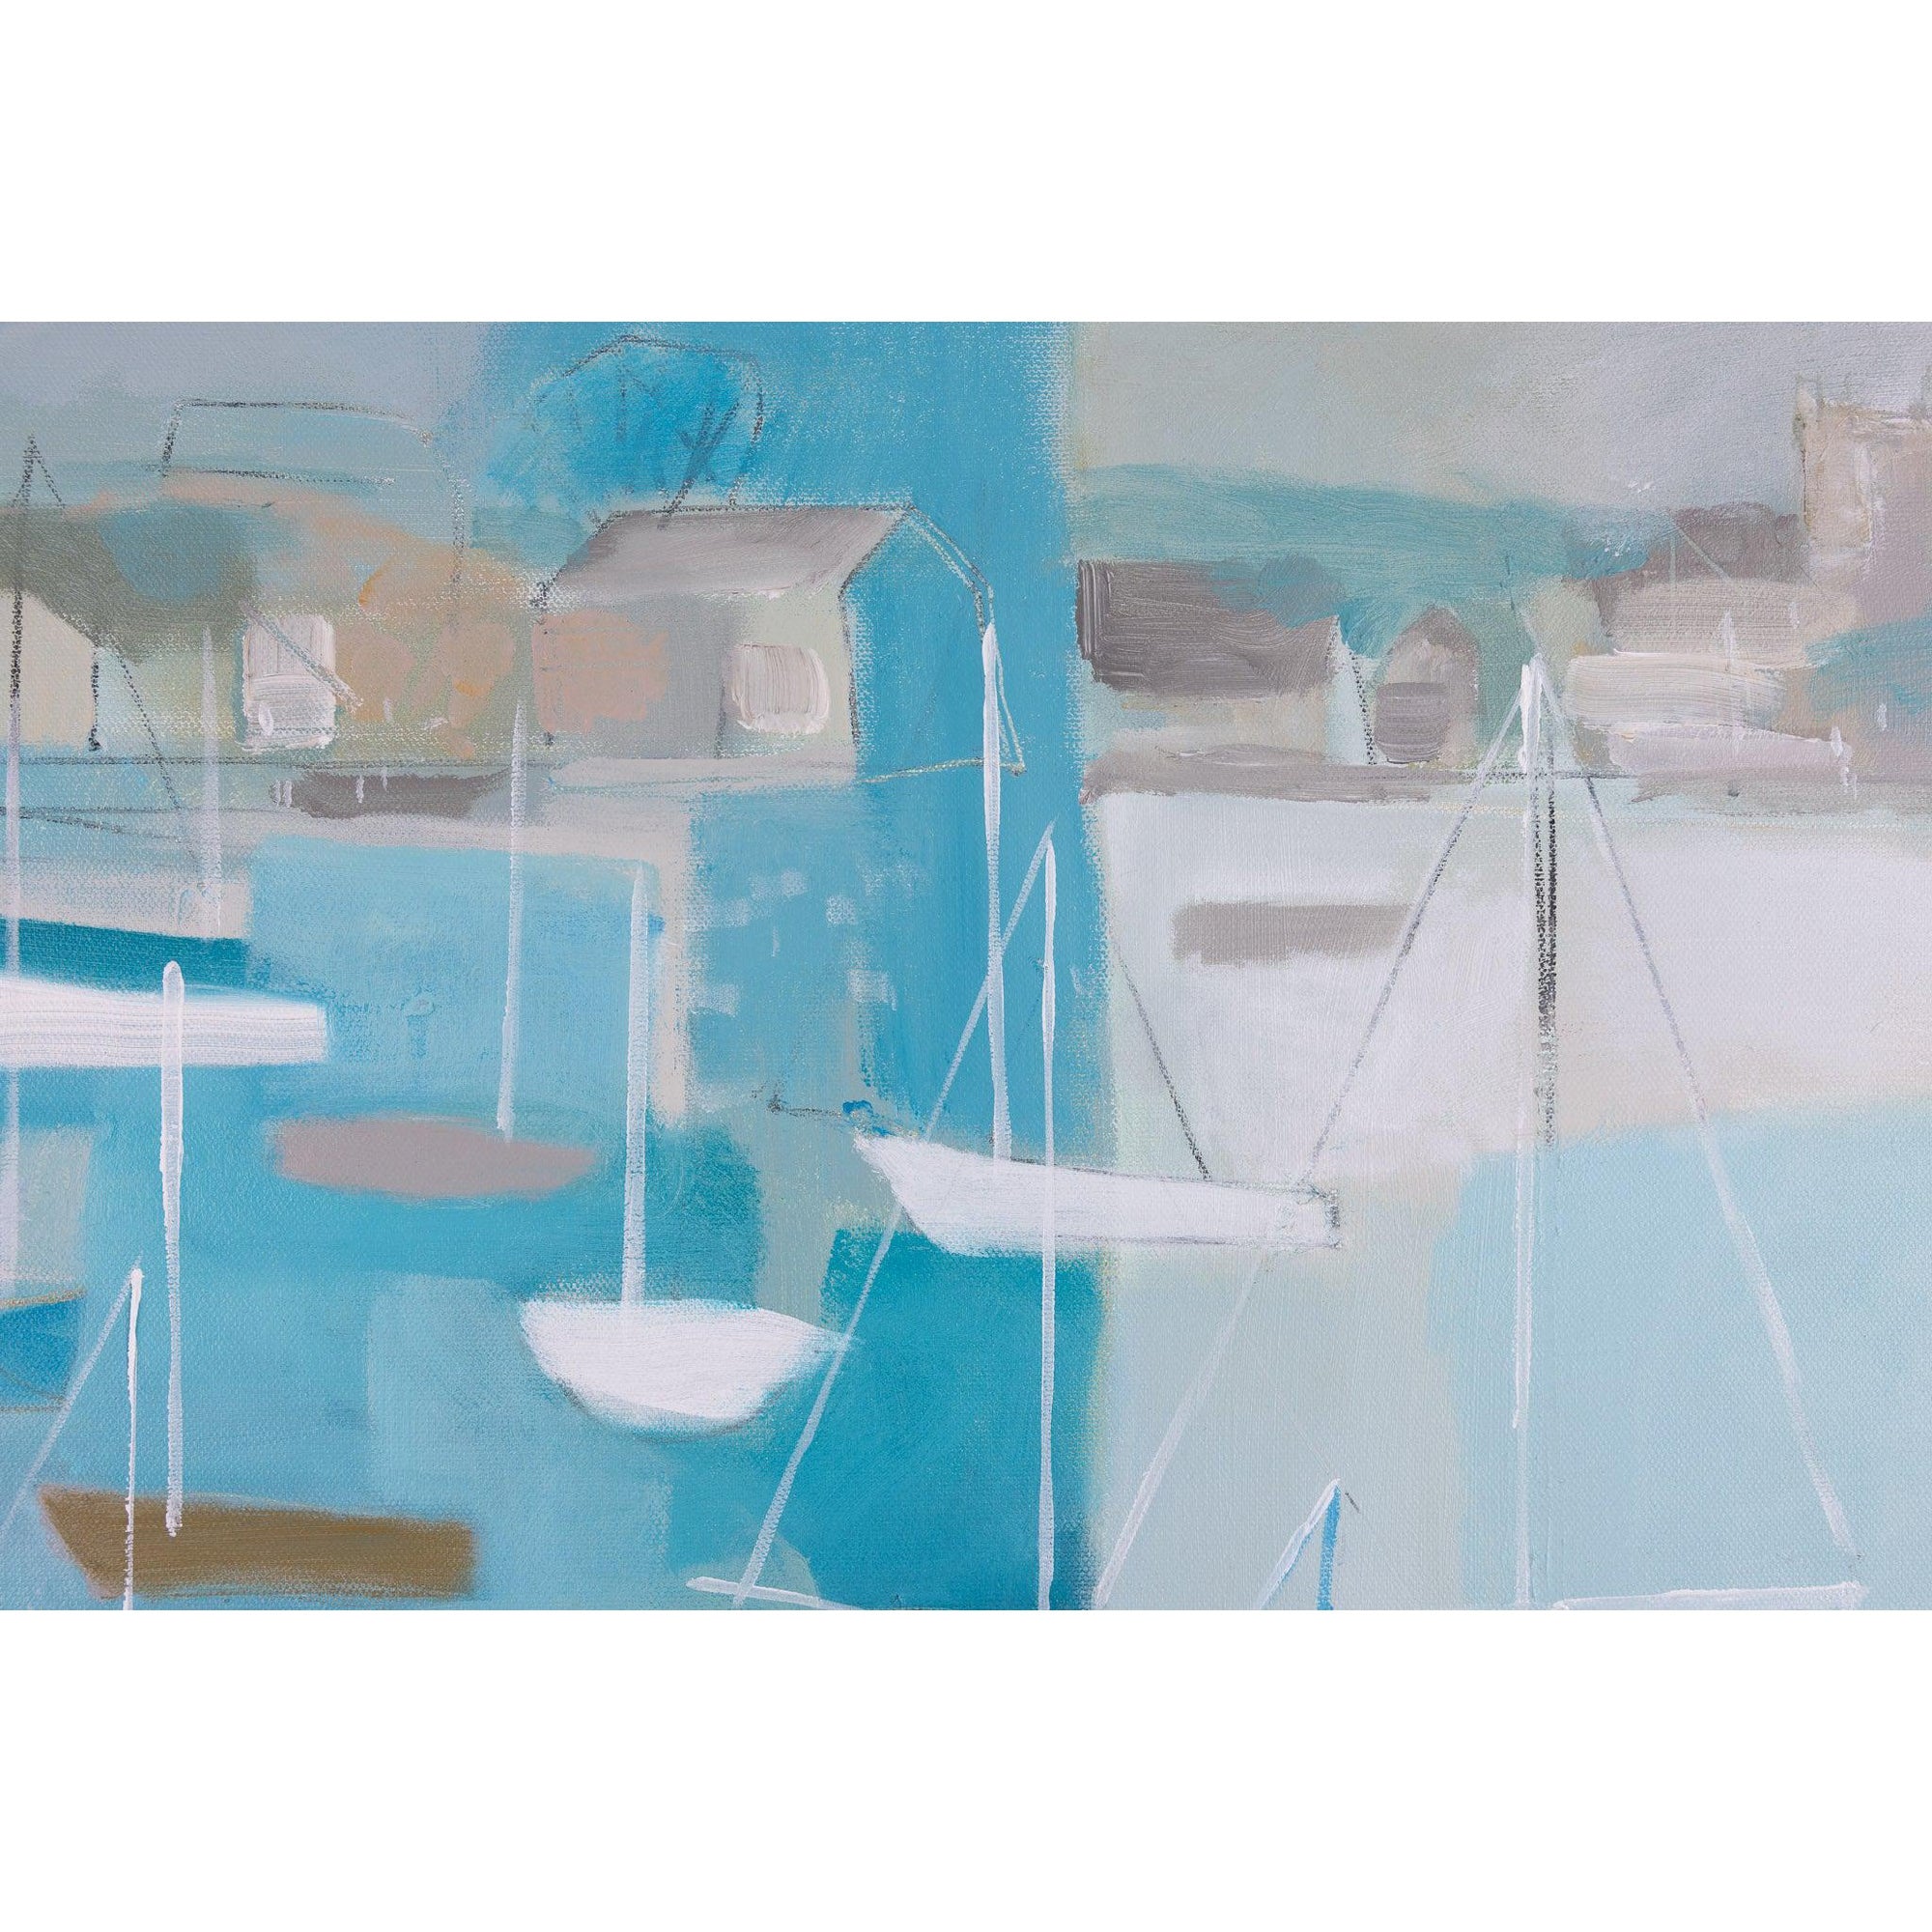 'Across the Camel Estuary, Cornwall' by John Button, available at Padstow Gallery, Cornwall